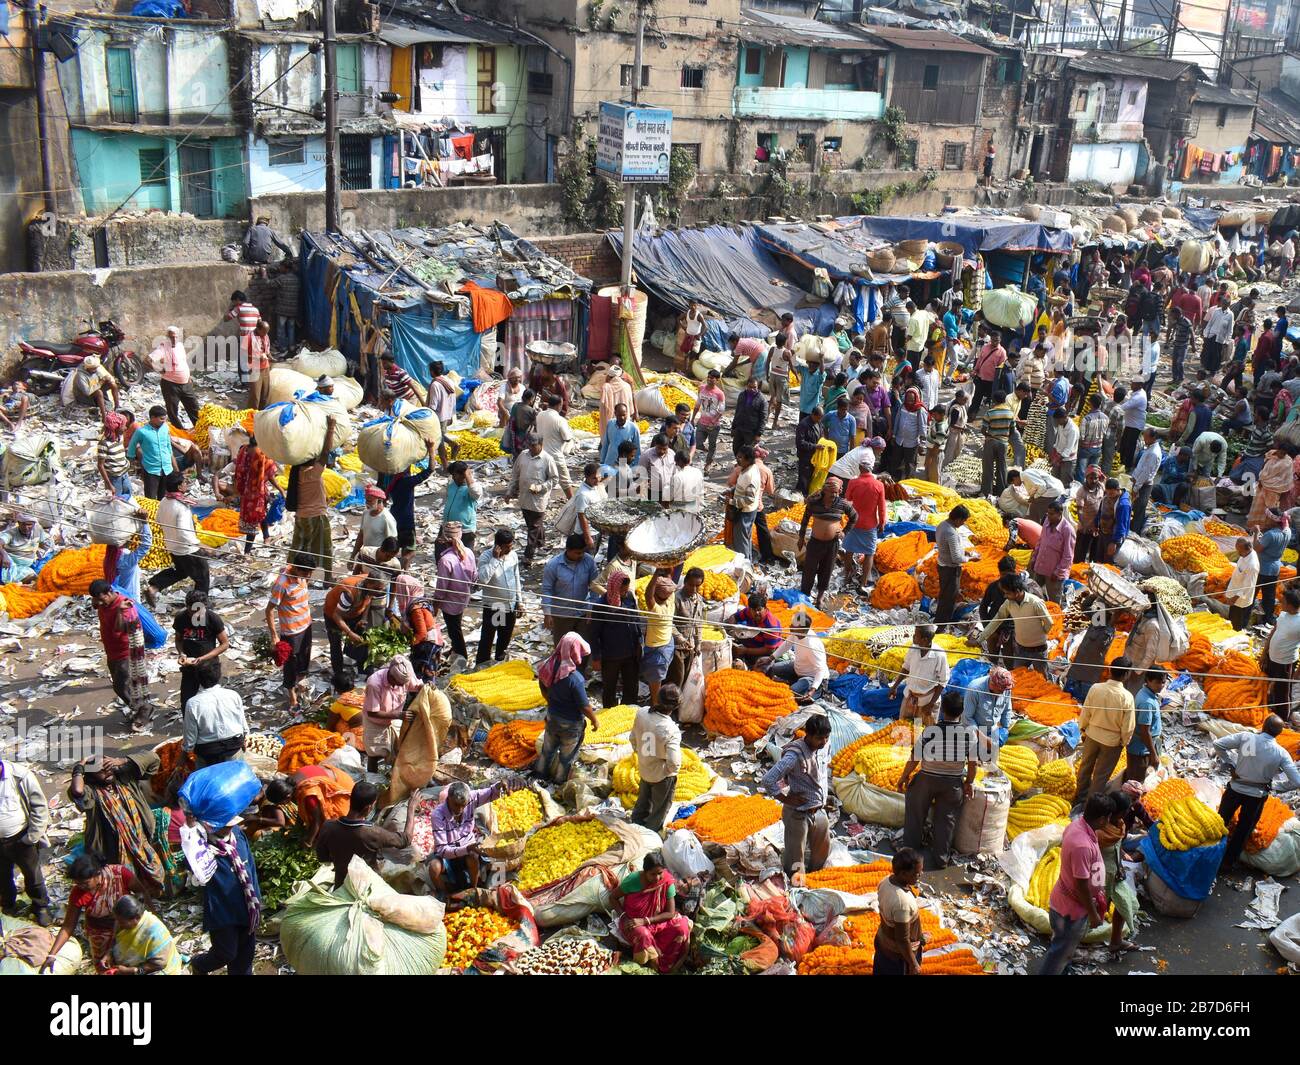 One of the biggest flower markets in Asia — Malik ghat, Kolkata, India — offering a myriad variety of flowers. Stock Photo